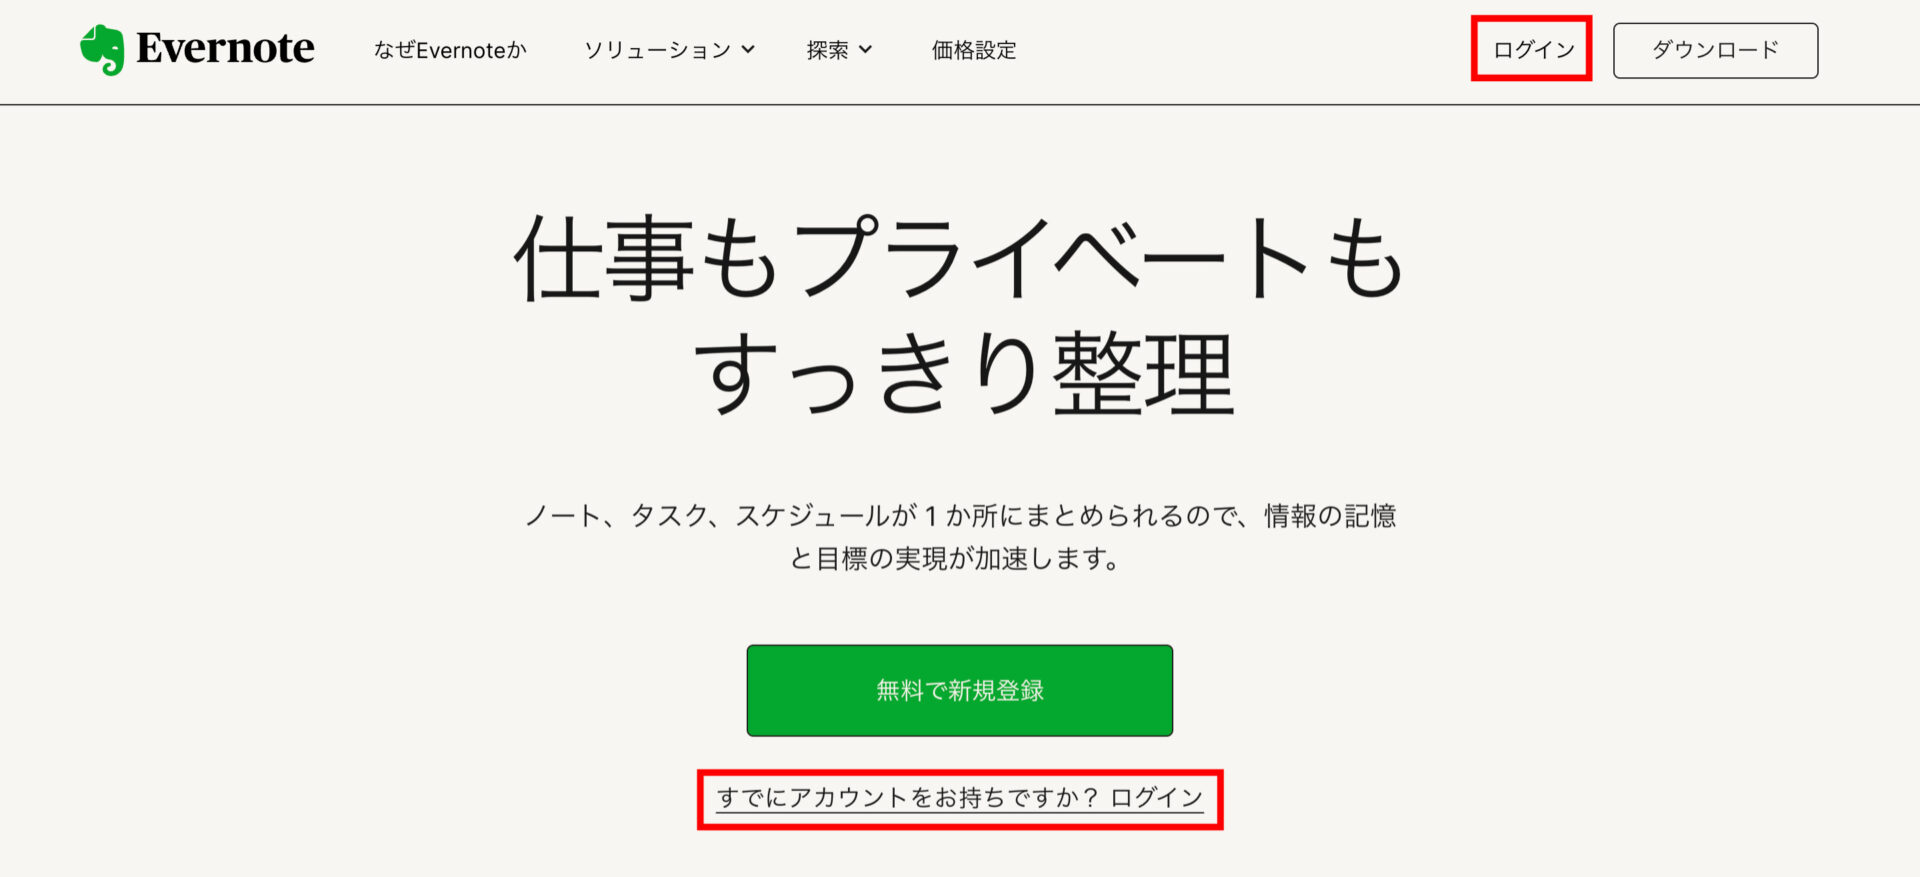 Evernoteの公式トップページ画面